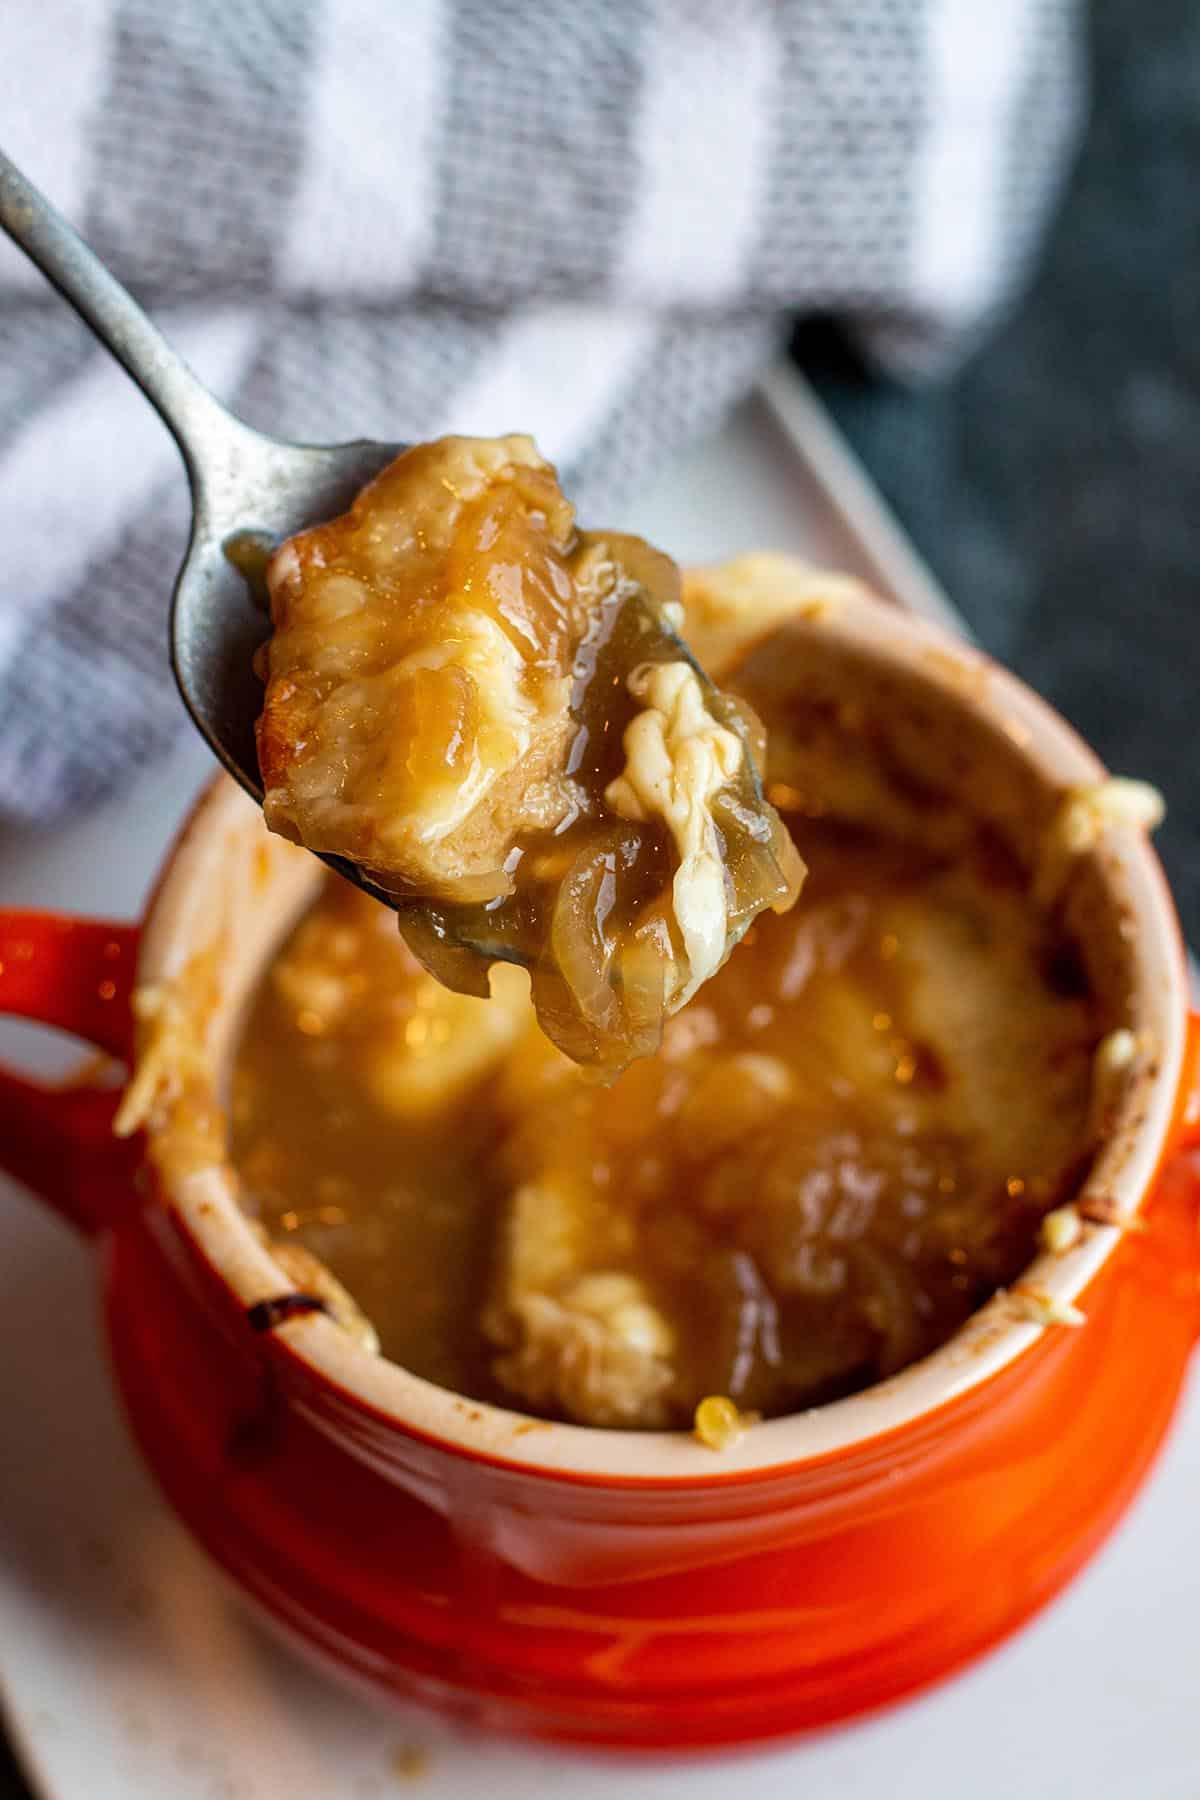 A spoon with a scoop of French onion soup being scooped out of a small soup bowl.